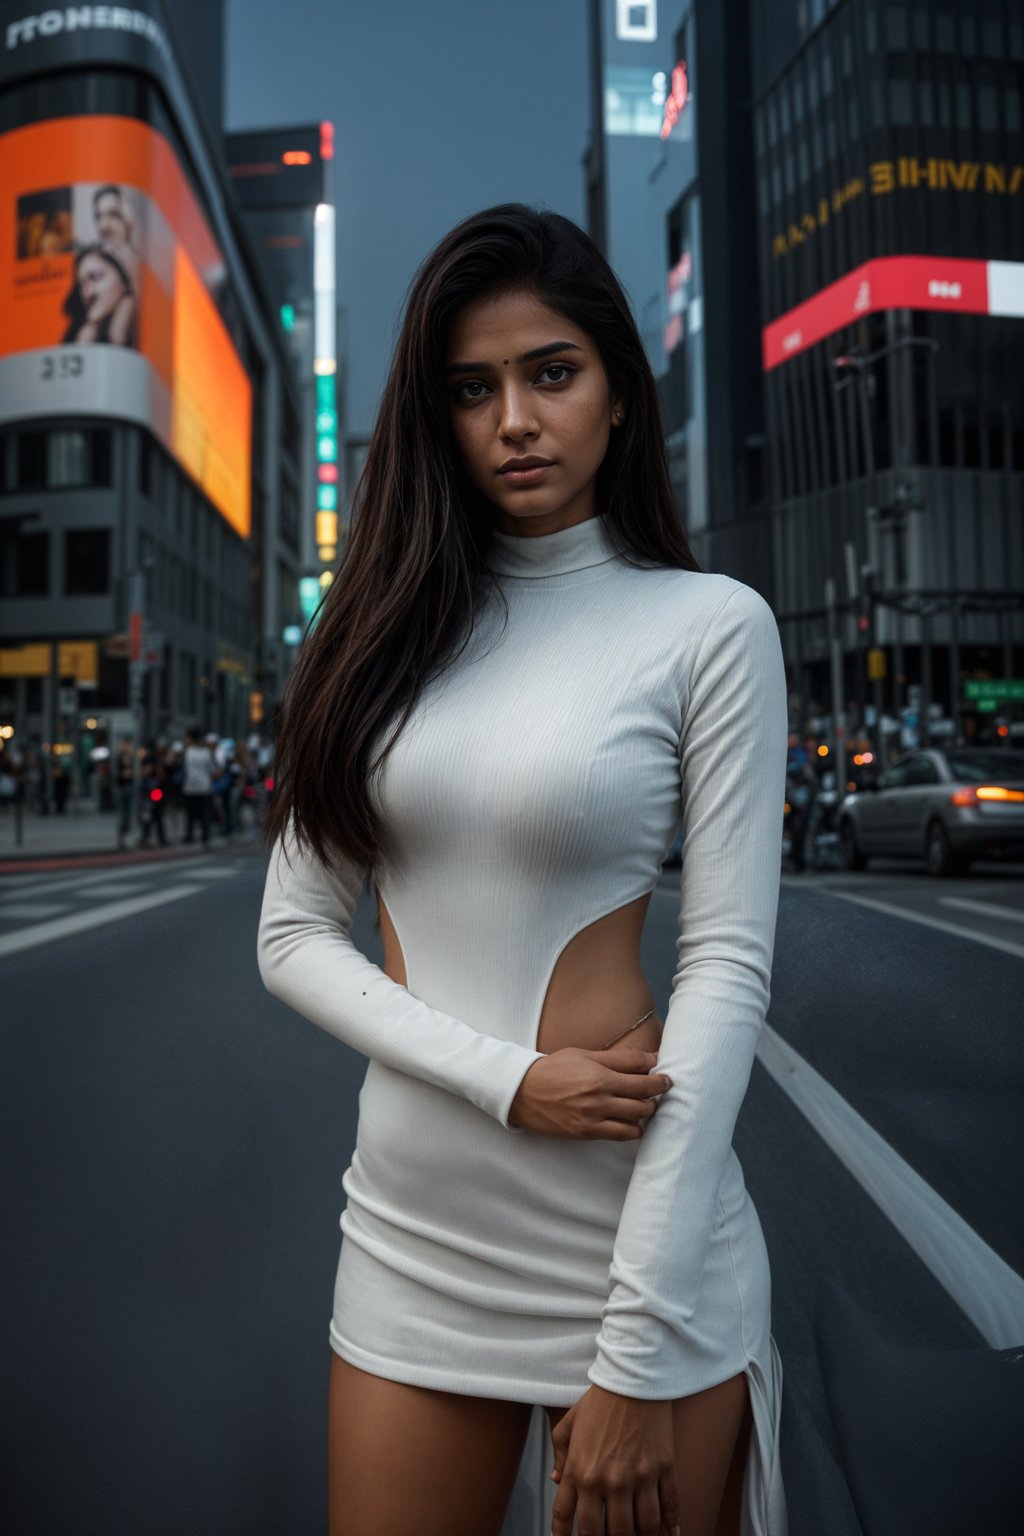 stylish and chic  woman in Tokyo wearing a futuristic outfit, Shibuya crossing in the background